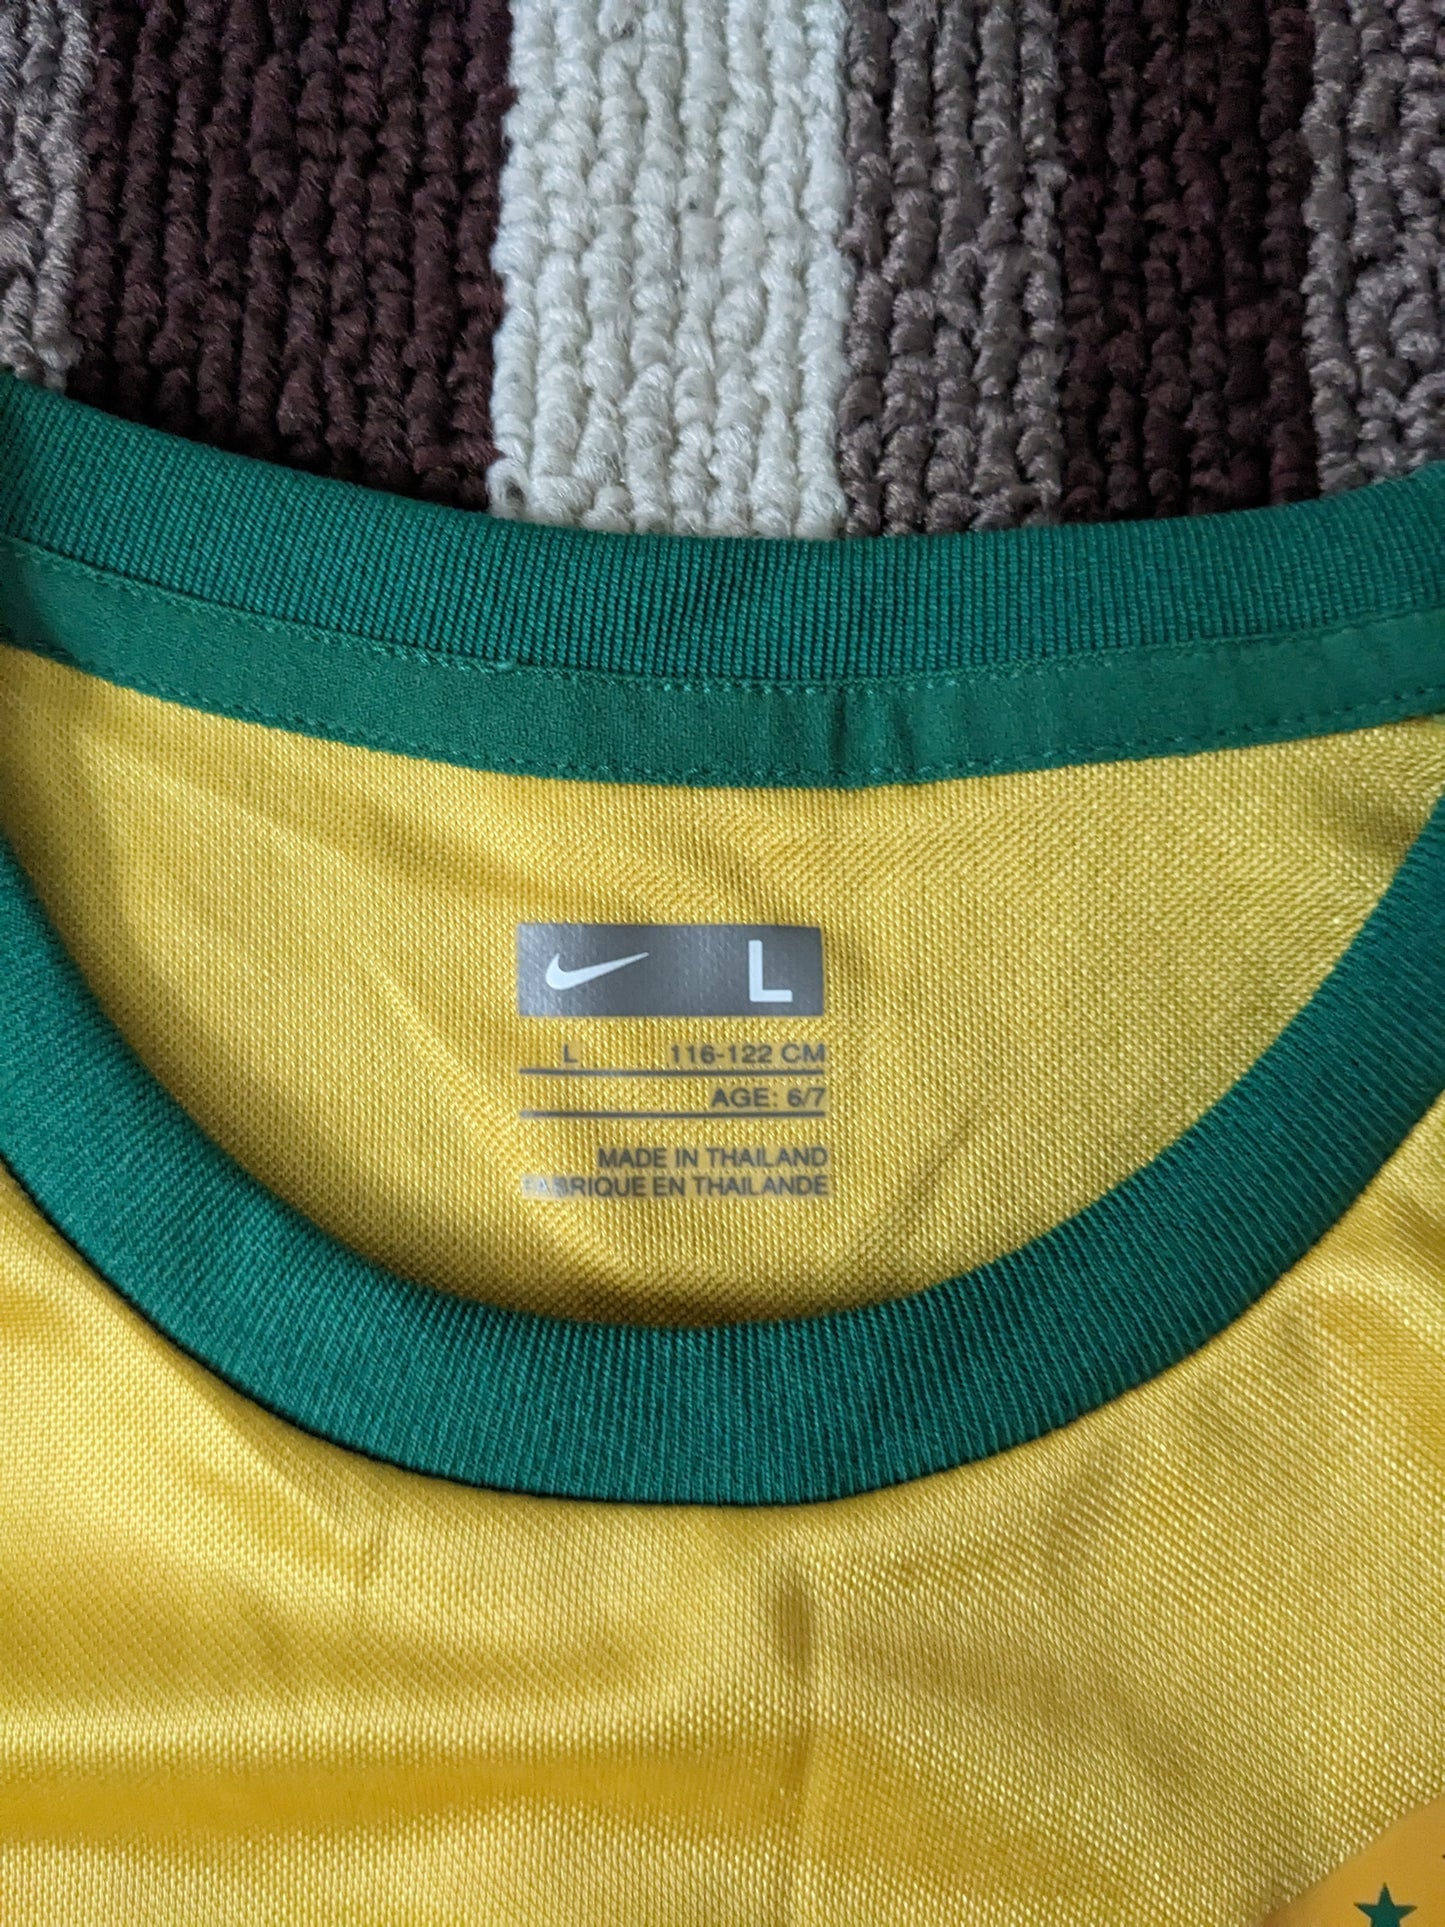 Brazil home jersey (YOUTH L) *BRAND NEW WITH TAGS